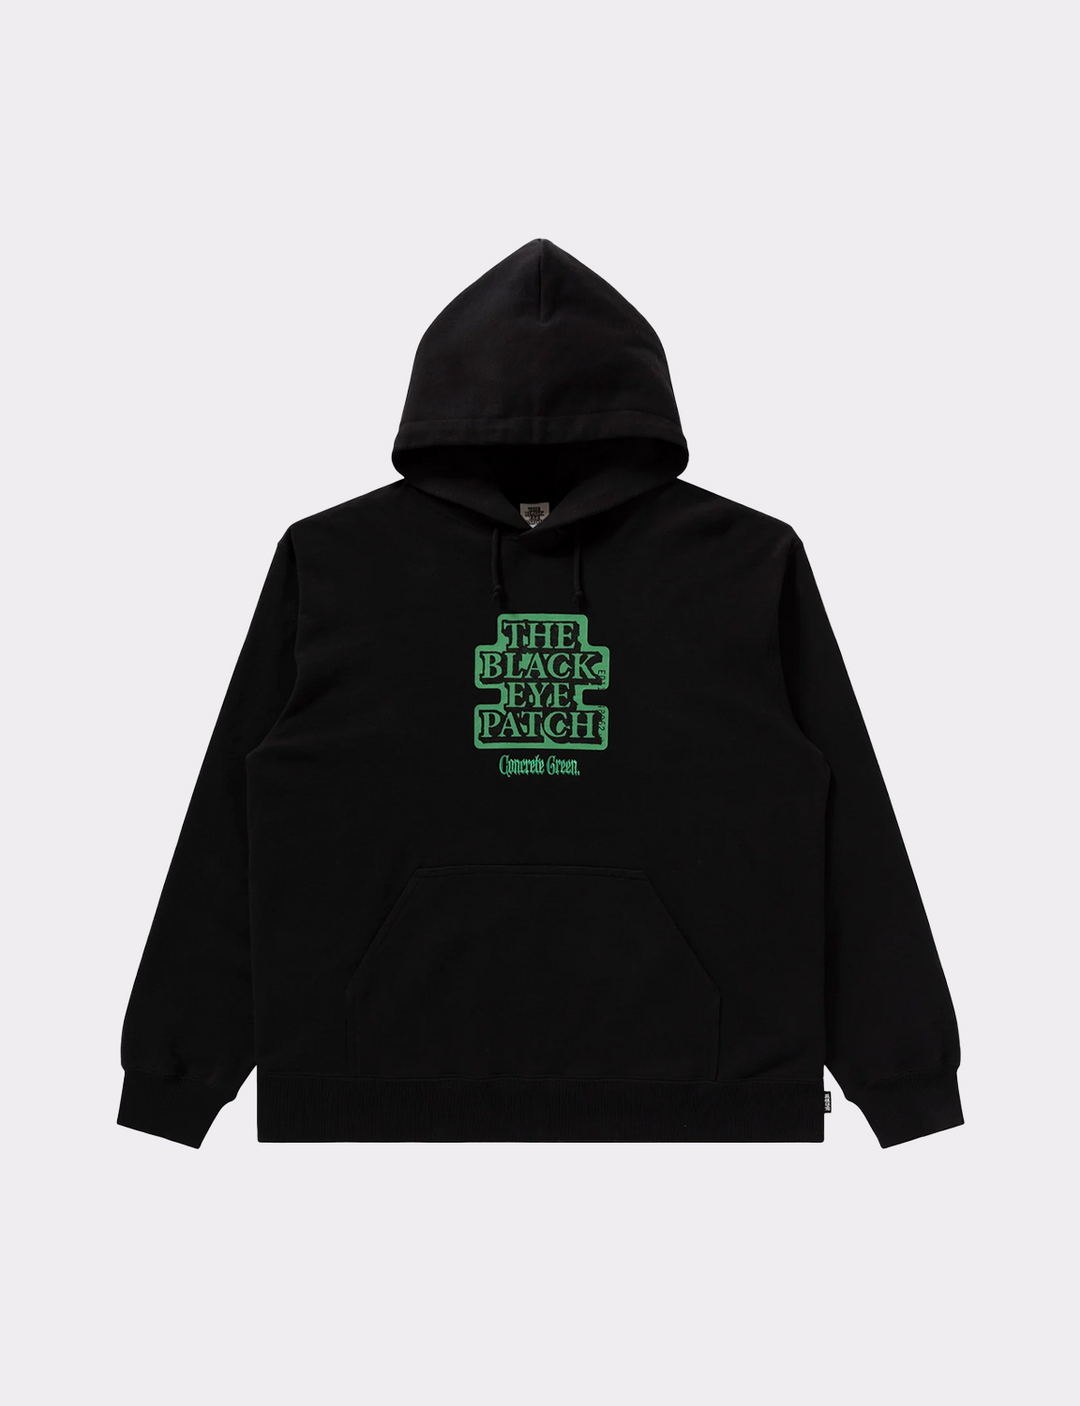 BlackEyePatch - CONCRETE GREEN HOODIE – The Contemporary Fix Kyoto